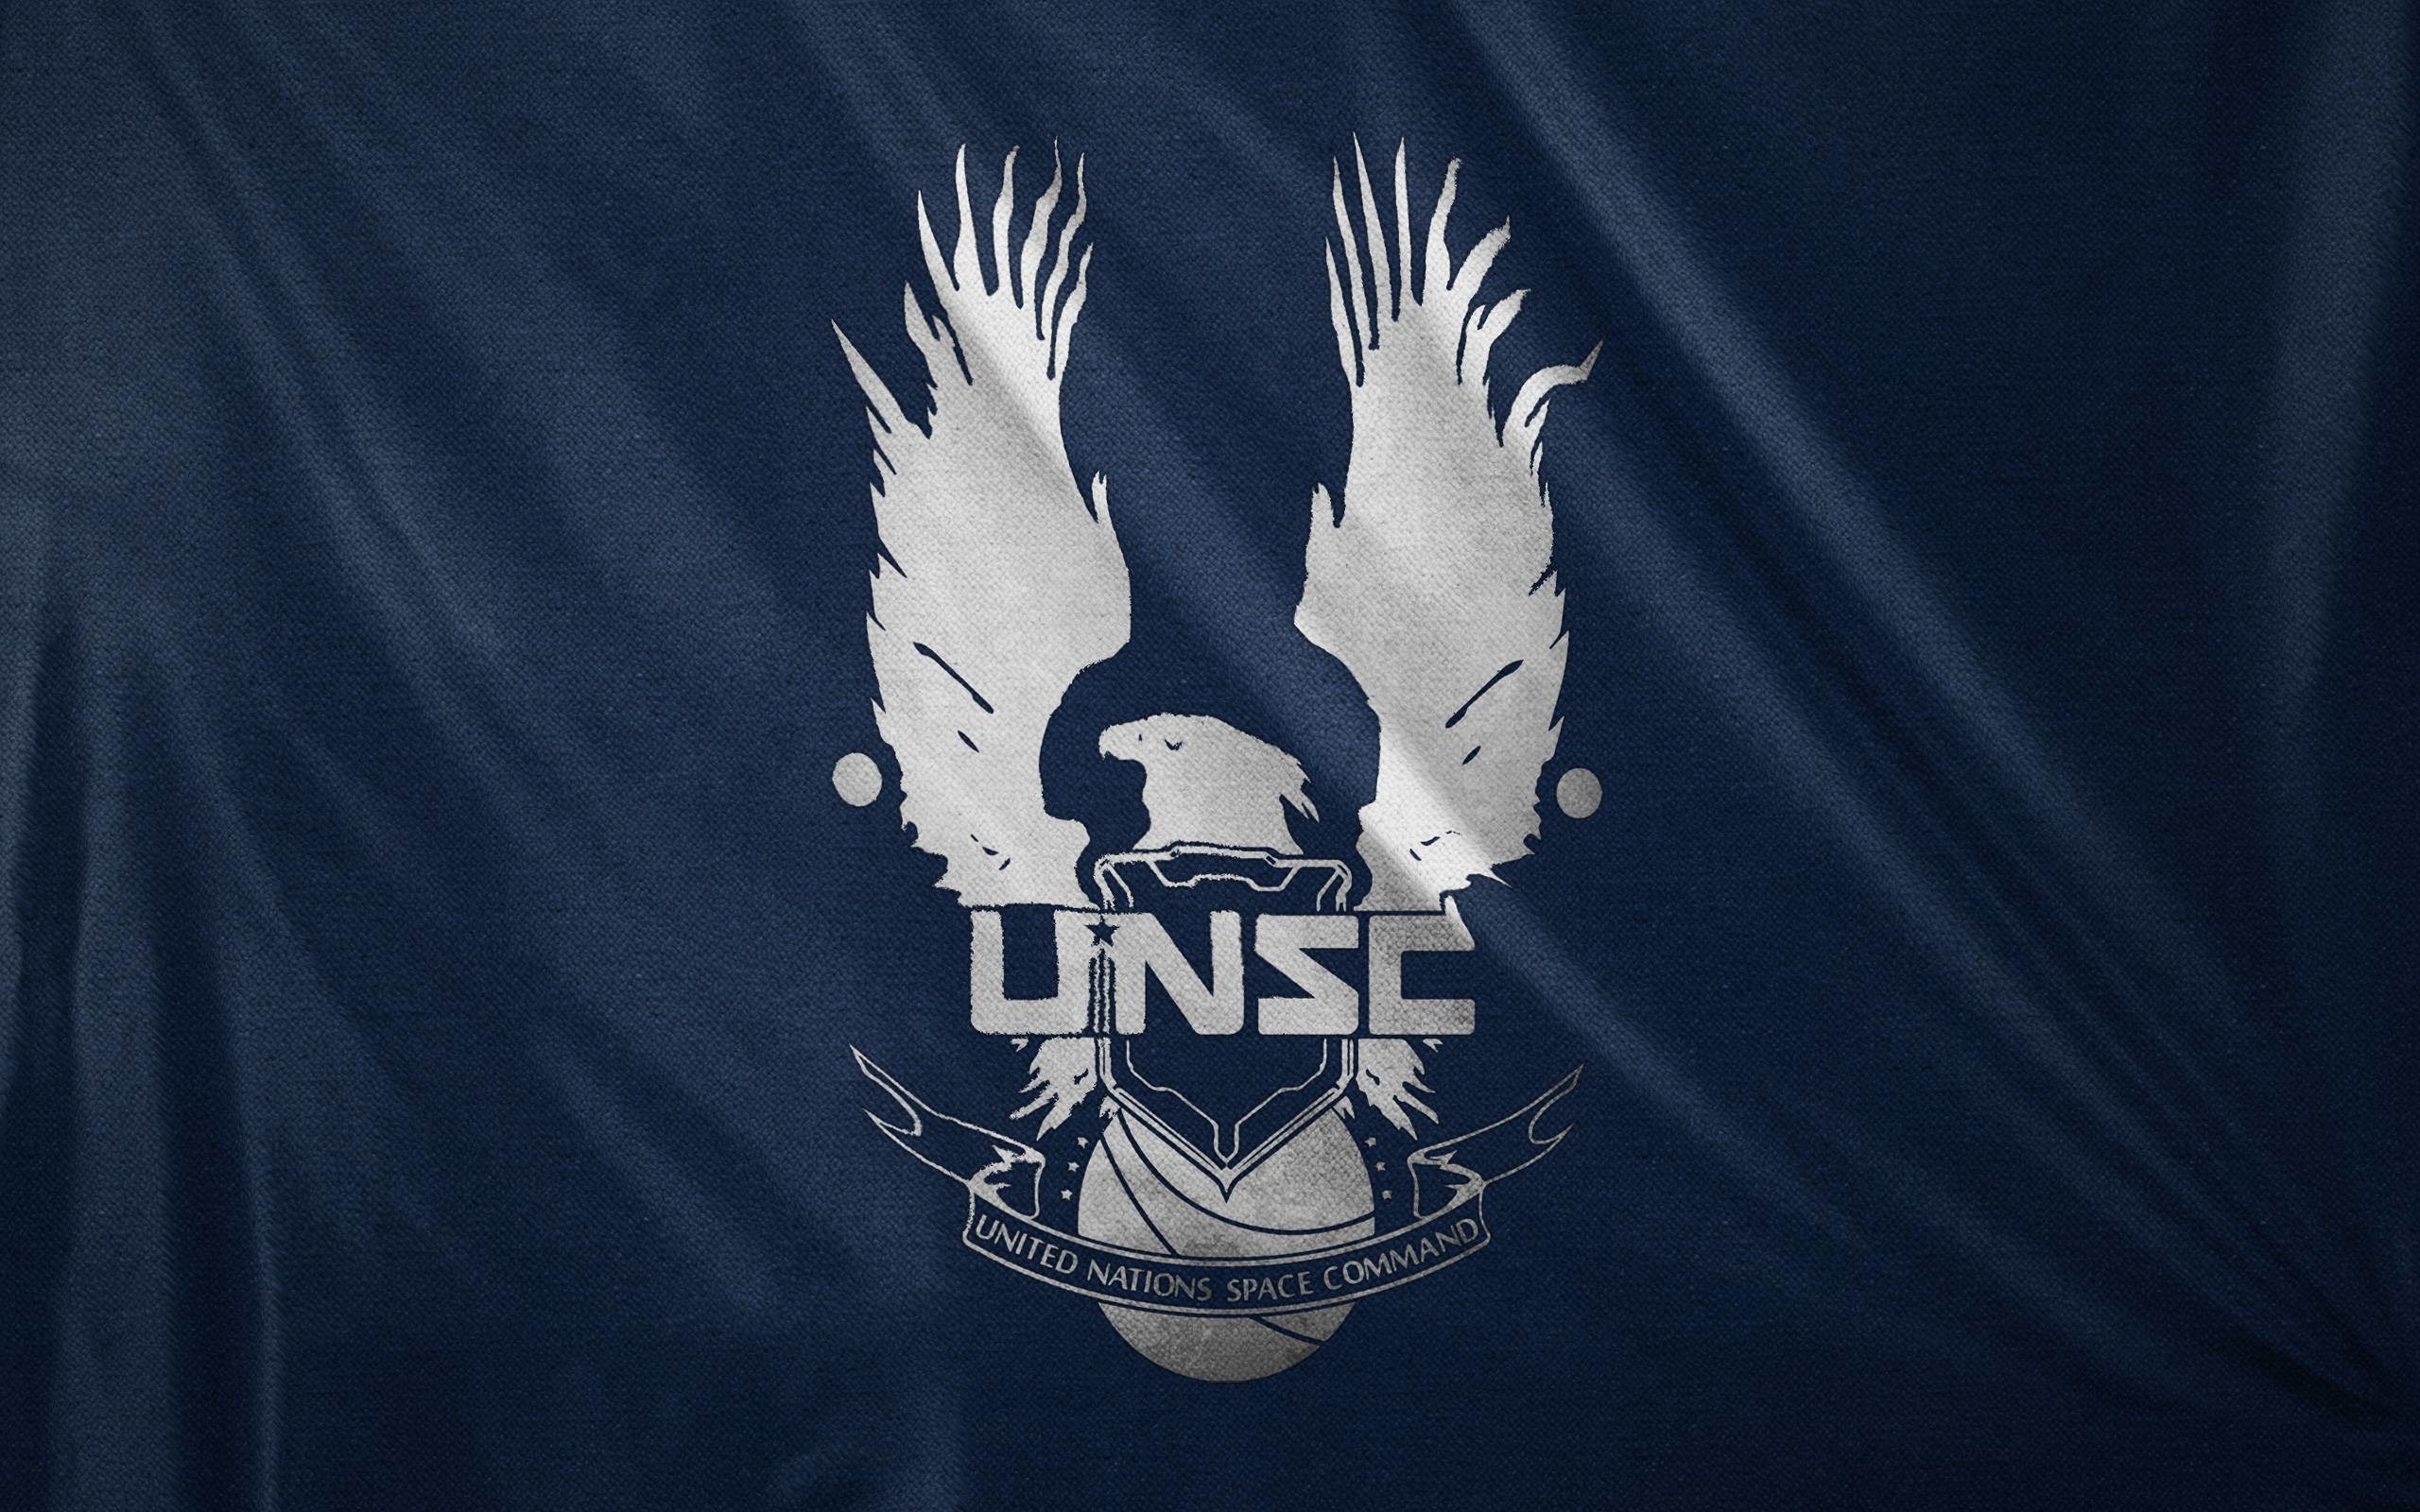 2560x1600 Unsc Wallpapers - Full HD wallpaper search